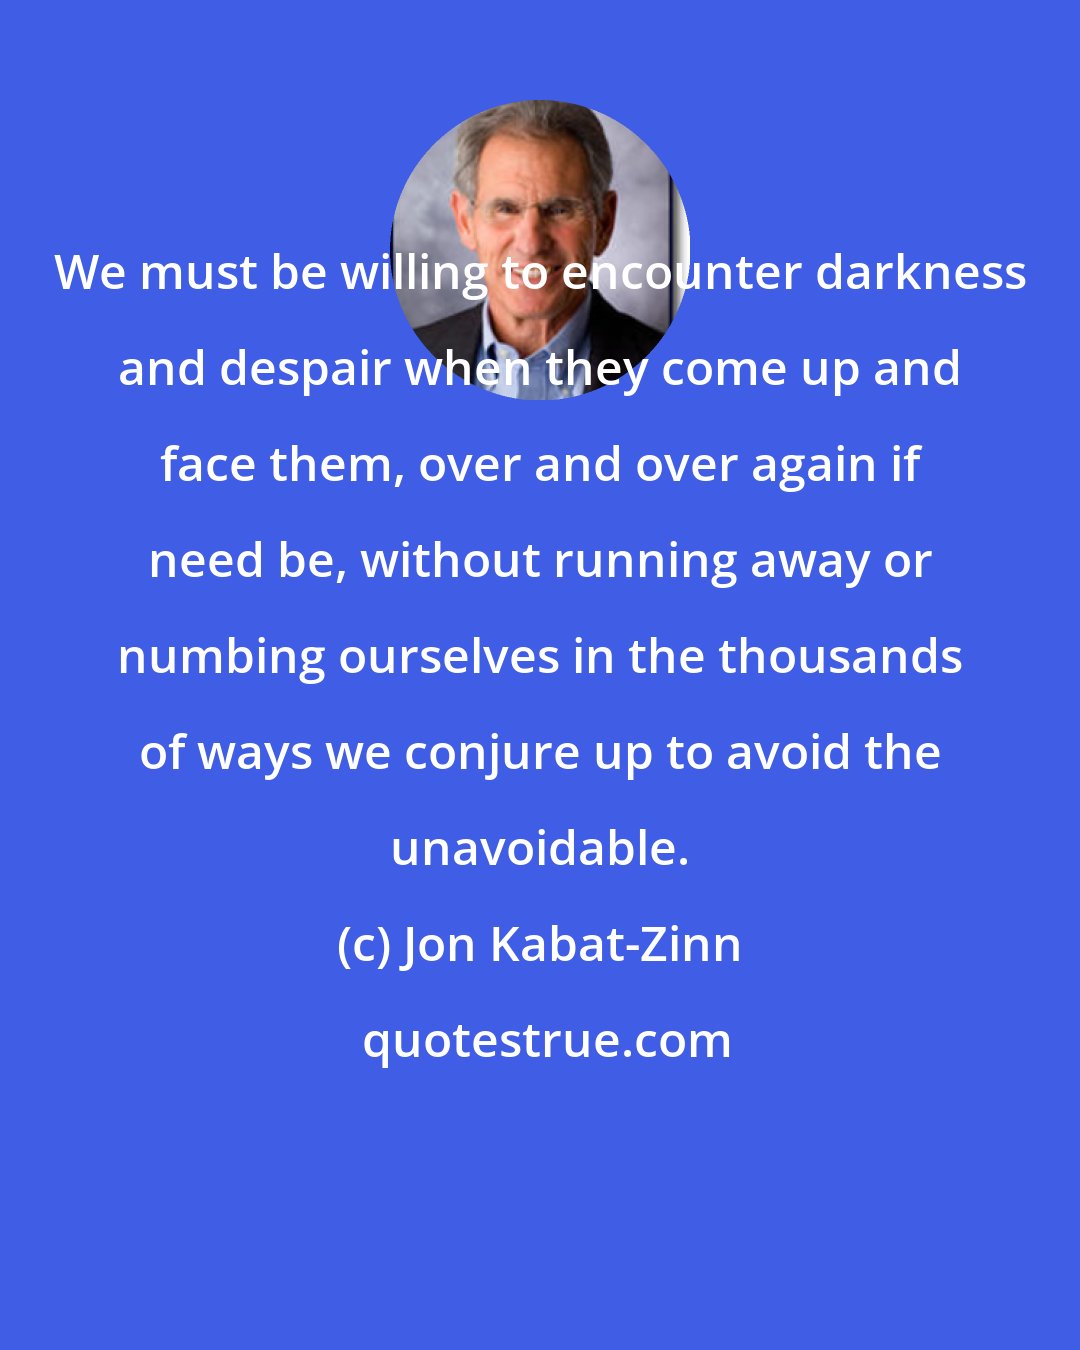 Jon Kabat-Zinn: We must be willing to encounter darkness and despair when they come up and face them, over and over again if need be, without running away or numbing ourselves in the thousands of ways we conjure up to avoid the unavoidable.